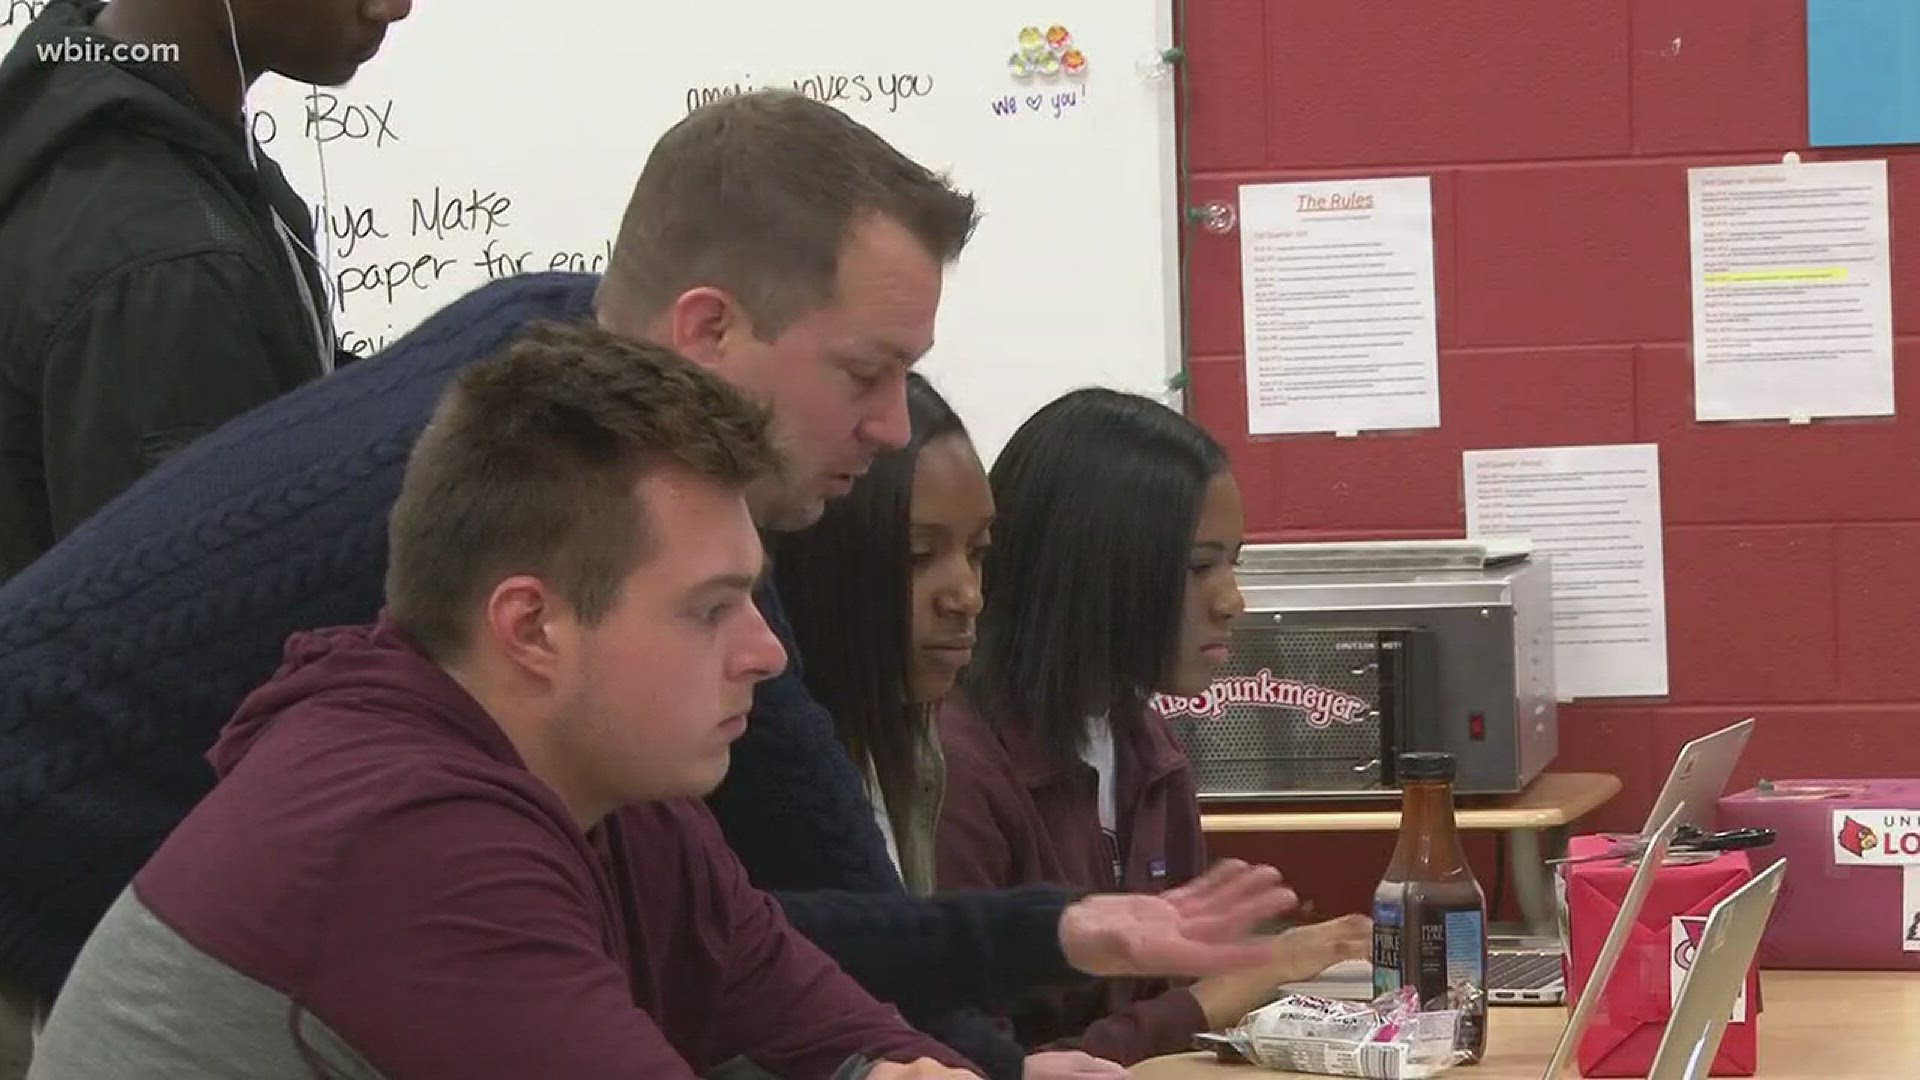 An Alcoa High School teacher put together a job fair to help her students and members of the community connect with future employers